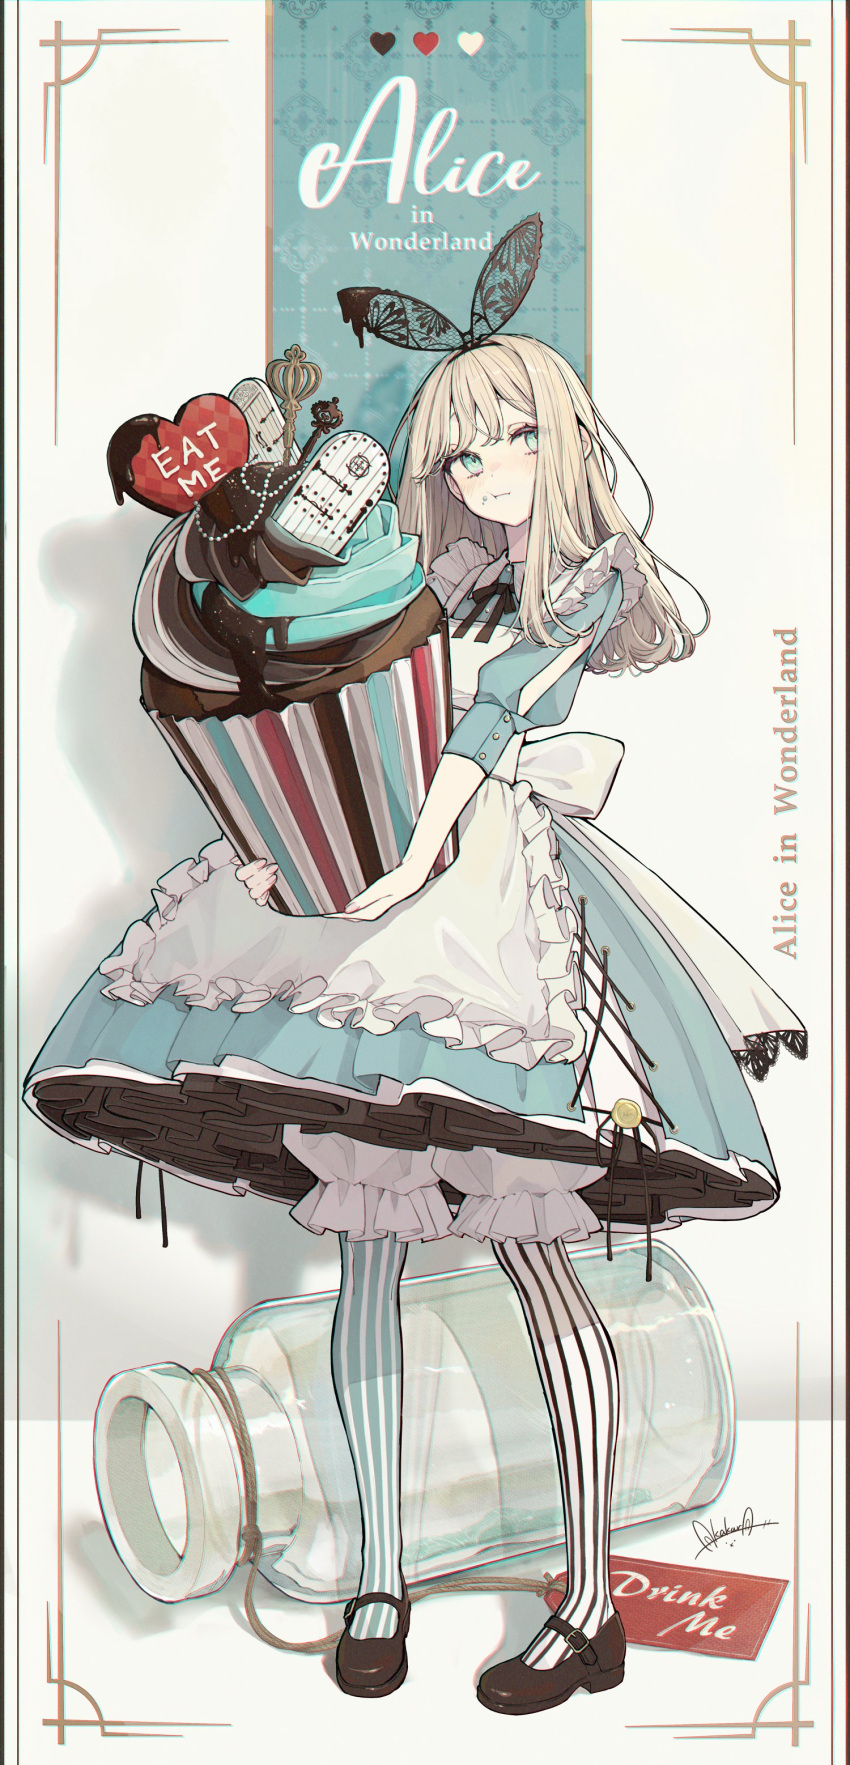 1girl :t absurdres akakura alice_(alice_in_wonderland) alice_in_wonderland aqua_dress aqua_eyes aqua_sleeves artist_name asymmetrical_legwear back_bow bangs black_bow black_bowtie blonde_hair bloomers bow bowtie brown_footwear brown_hairband brown_skirt chocolate_icing cuff_links cupcake dessert dress english_text eyebrows_visible_through_hair food food_in_mouth food_on_face framed frilled_dress frills full_body glass_bottle hair_ornament hairband heart highres holding holding_food icing long_hair looking_to_the_side mary_janes mismatched_legwear petticoat scepter shadow shoes signature skirt sleeves_past_elbows straight_hair striped striped_legwear tag underwear vertical-striped_legwear vertical_stripes white_bloomers wristband